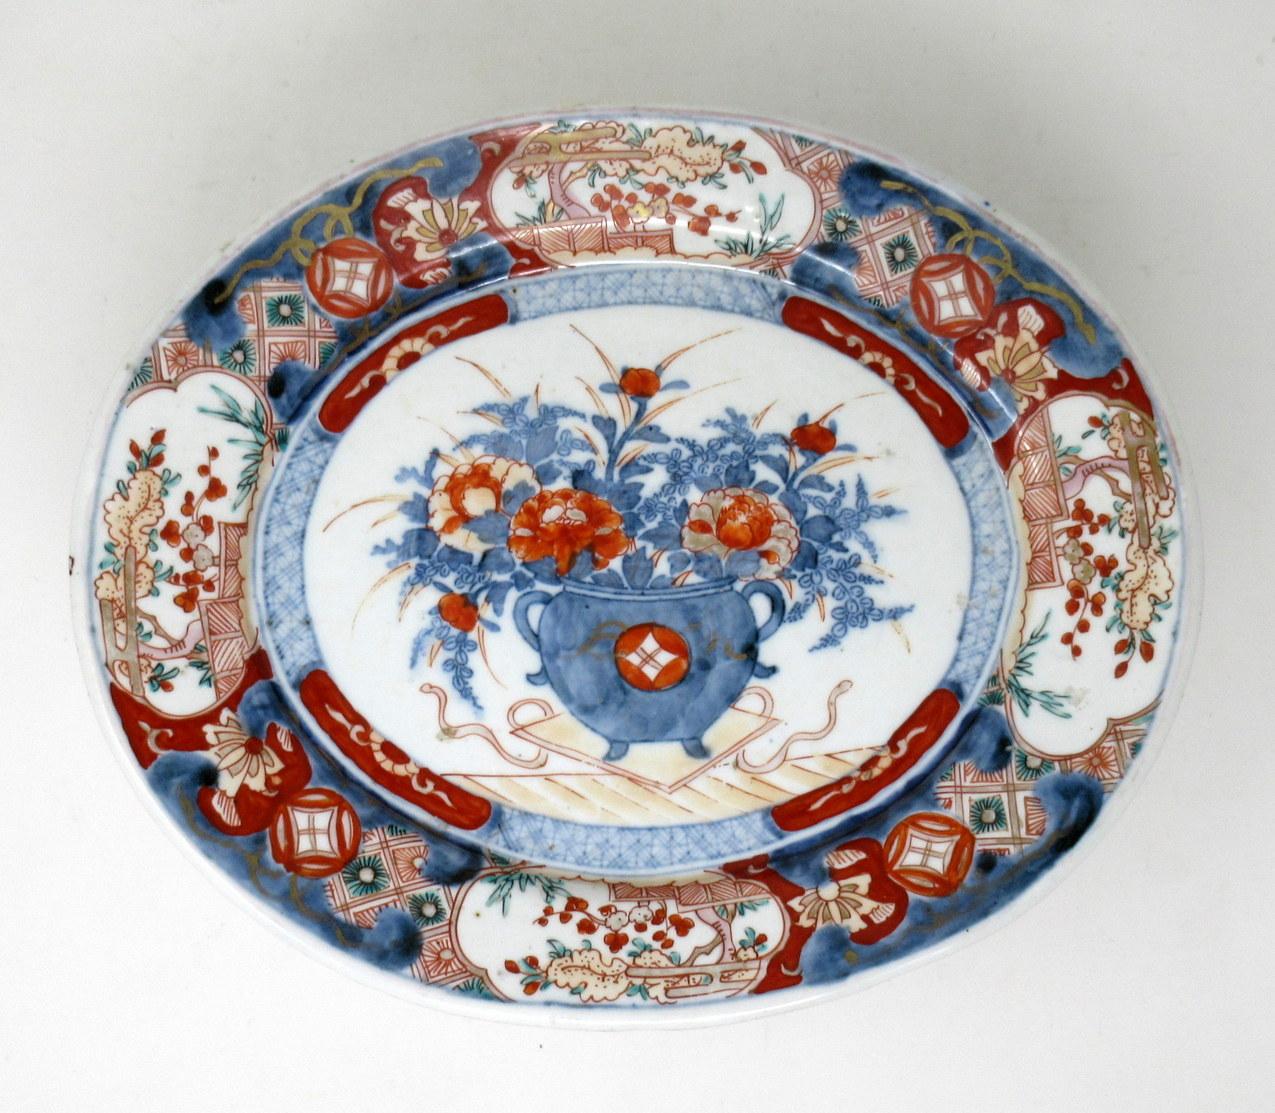 Stunning large Japanese or Chinese Imari oval form deep dish or centerpiece of outstanding quality, made during the last quarter of the 19th century.

Hand decorated with all-over typical decorative Imari palette in colors of iron red dark blues